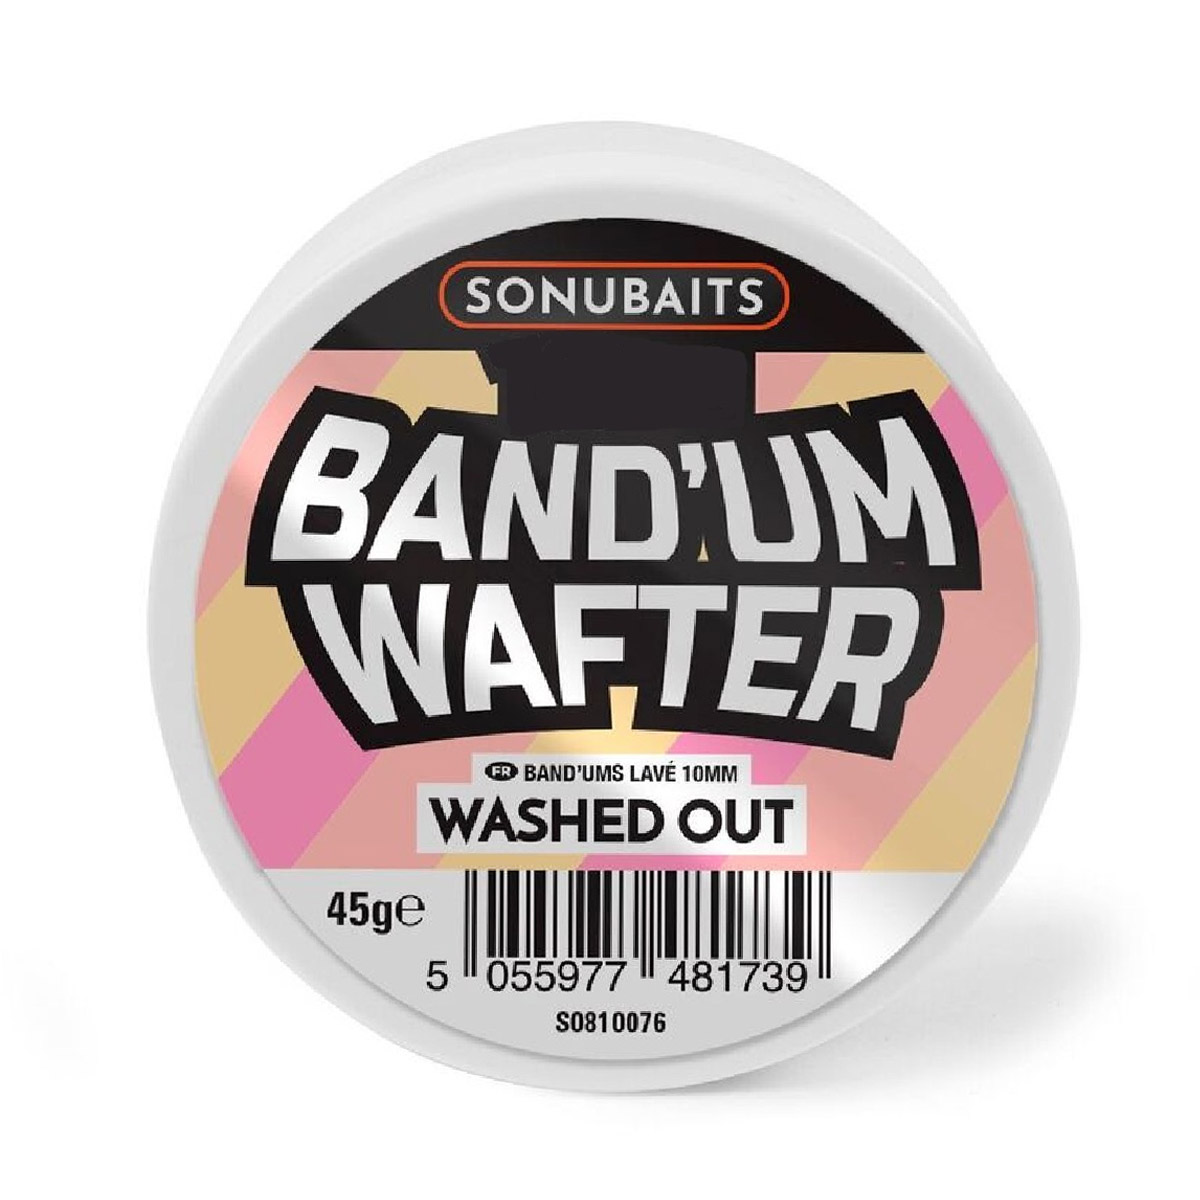 Sonubaits Band'um Wafter Washed Out